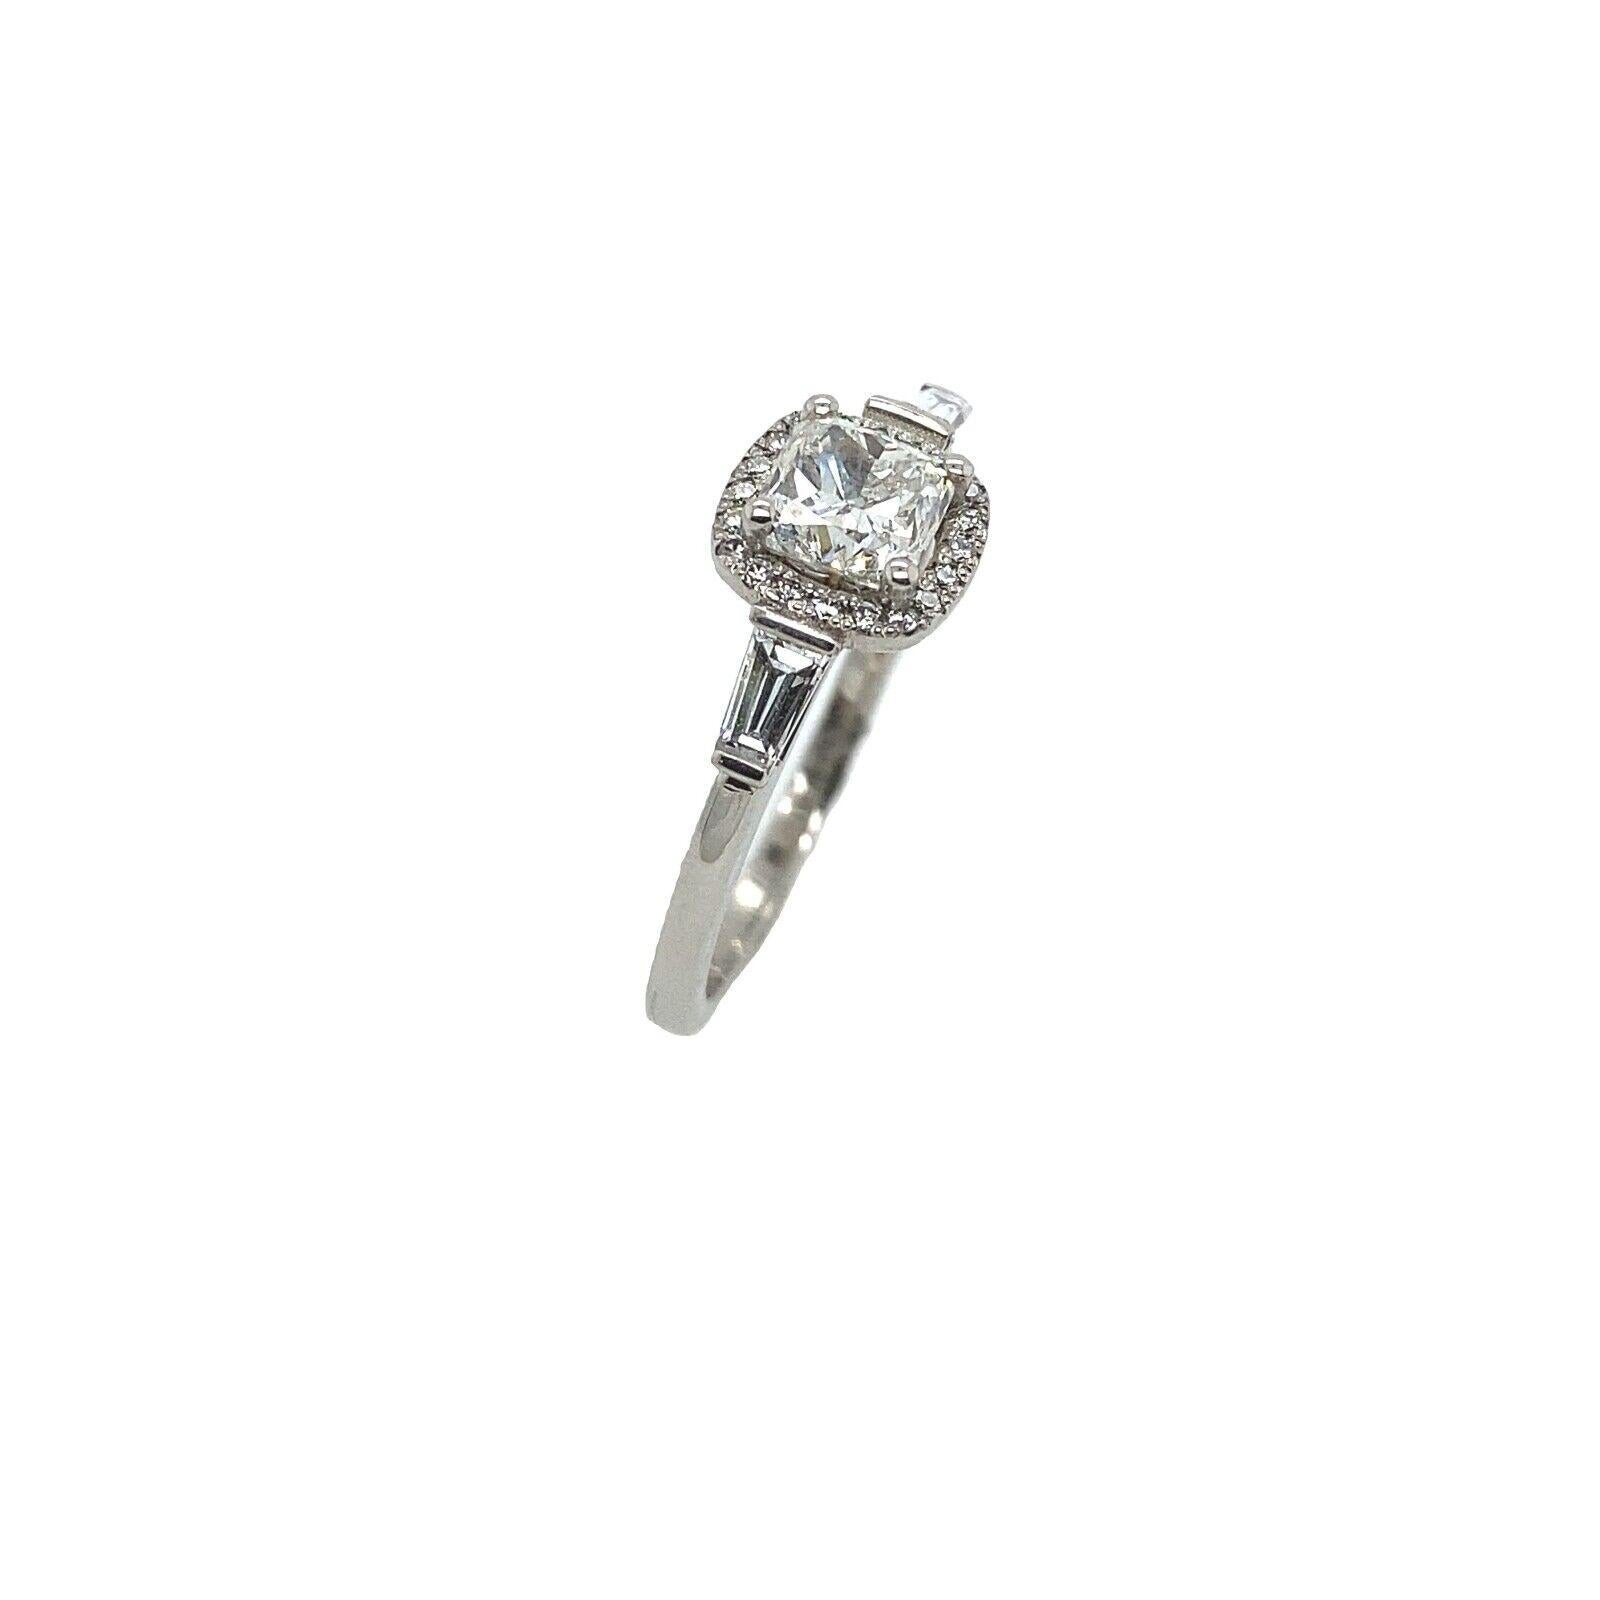 Platinum 0.90ct H Si2 GIA Certified Cushion Shape Diamond Ring

Additional Information:
Central Diamond Weight: 0.90ct
Tapered Diamond Weight: 0.28ct
Round Brilliant Cut Diamonds: 0.10ct
Total Diamond Weight: 1.28ct
Diamond Colour: H
Diamond